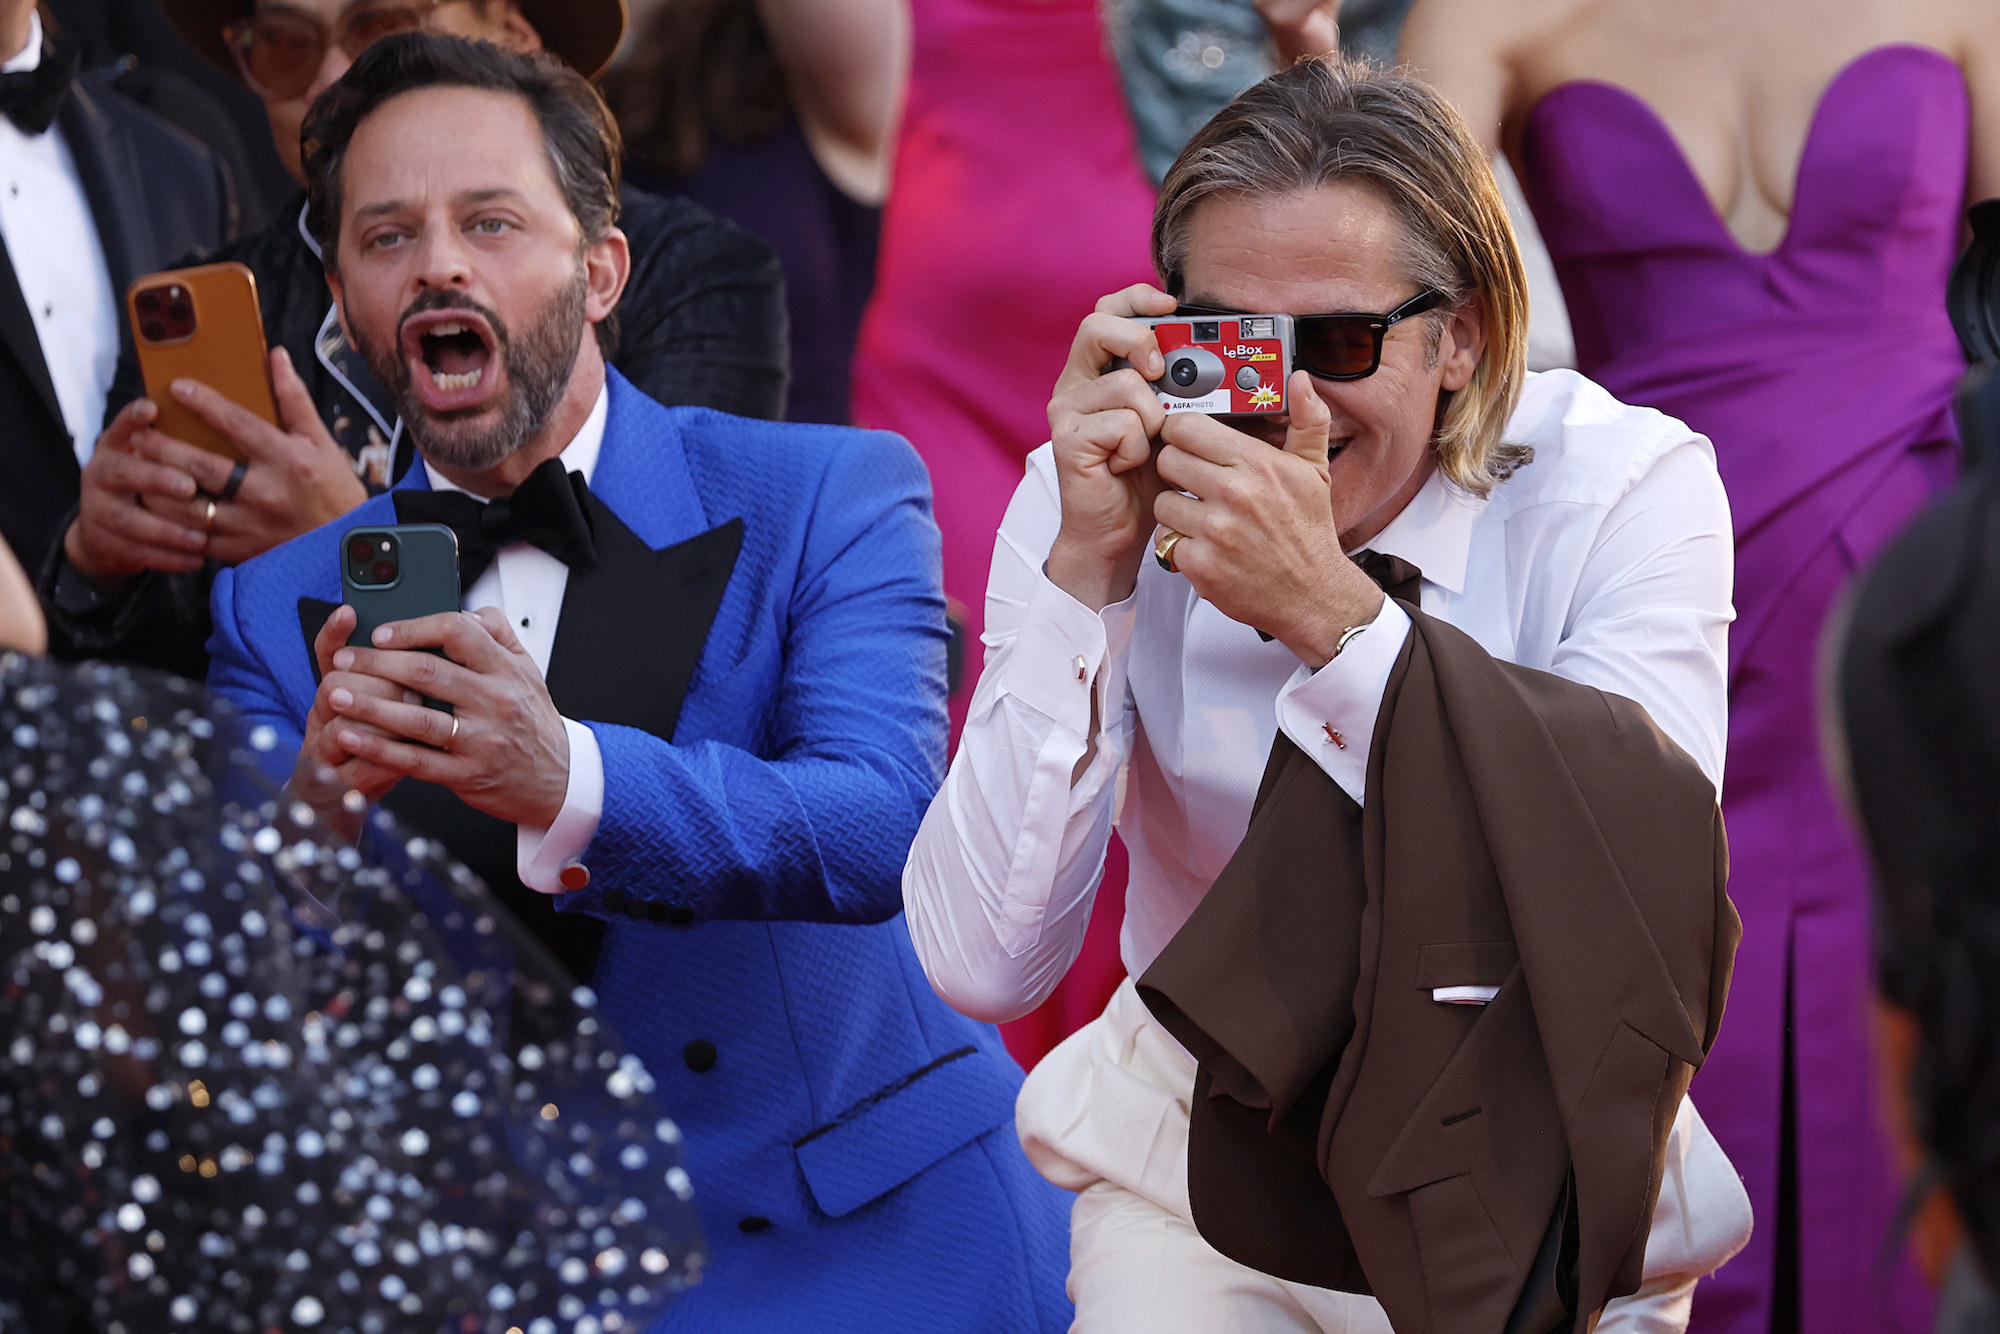 Chris holding up a disposable camera as he takes photos next to Nick Kroll